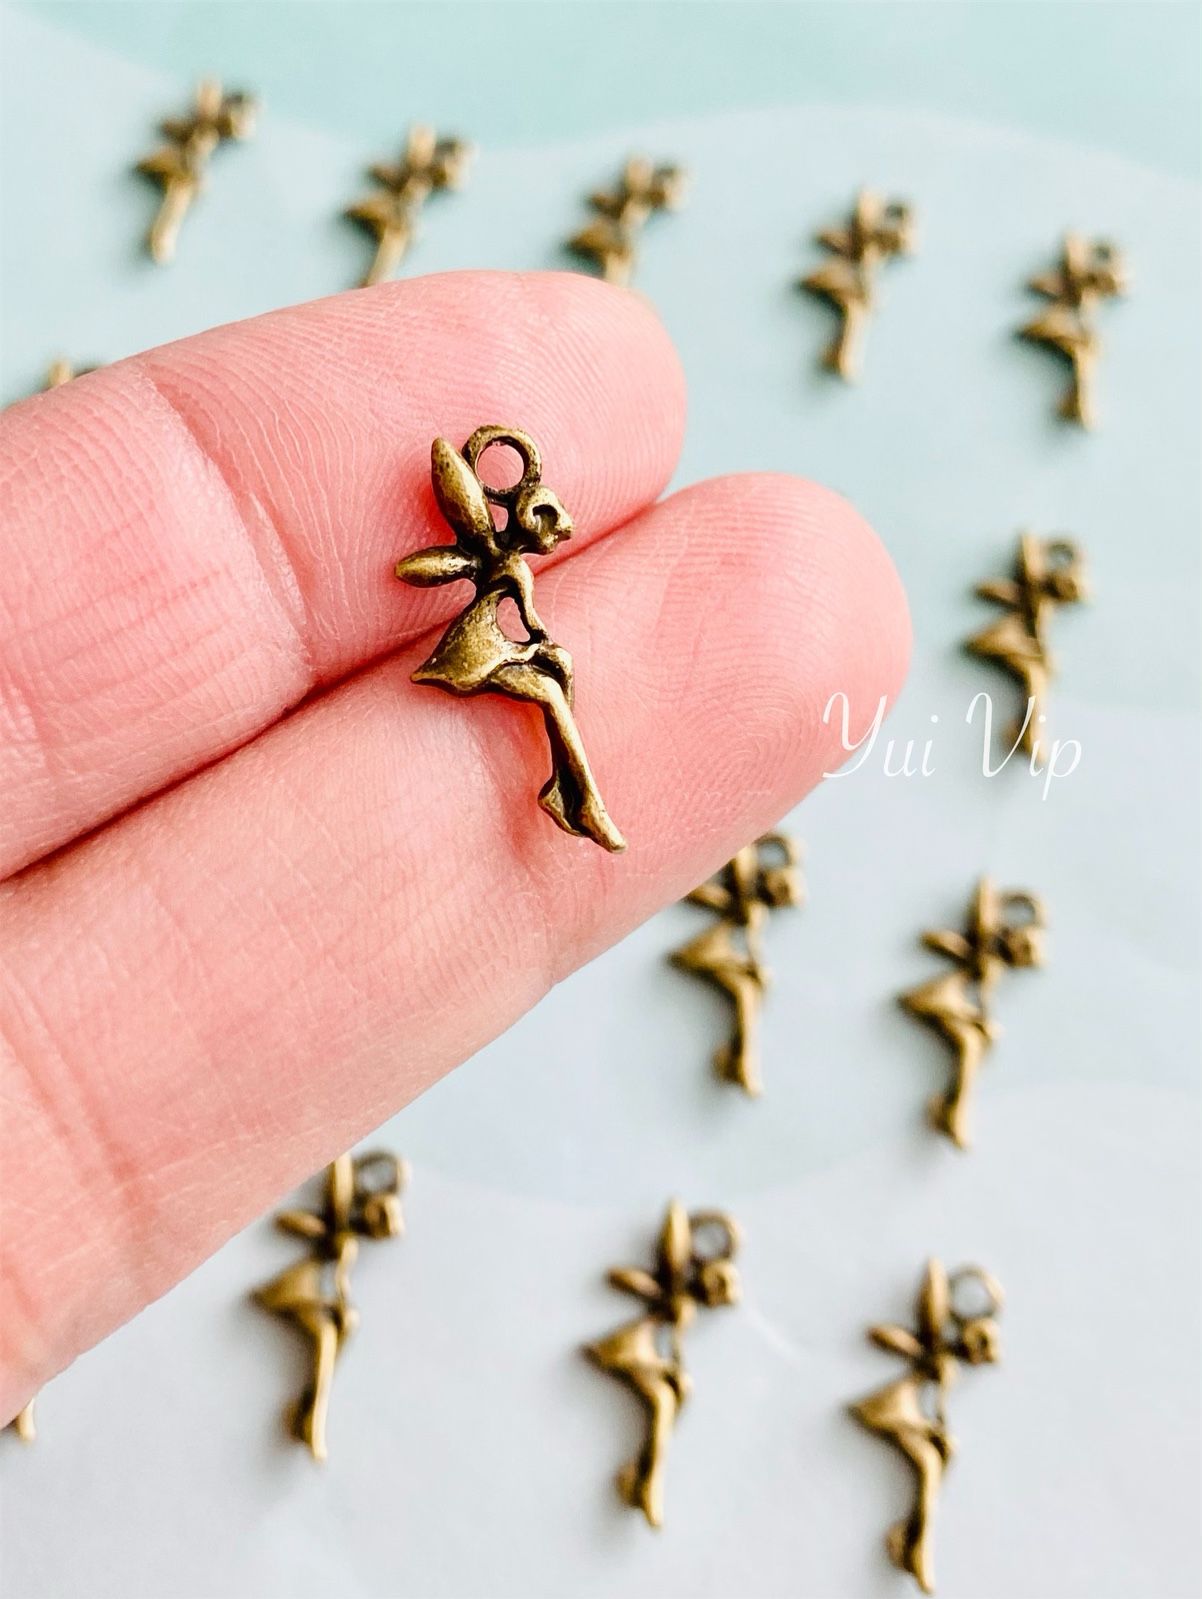 25 Antique Brass Fairy Charms